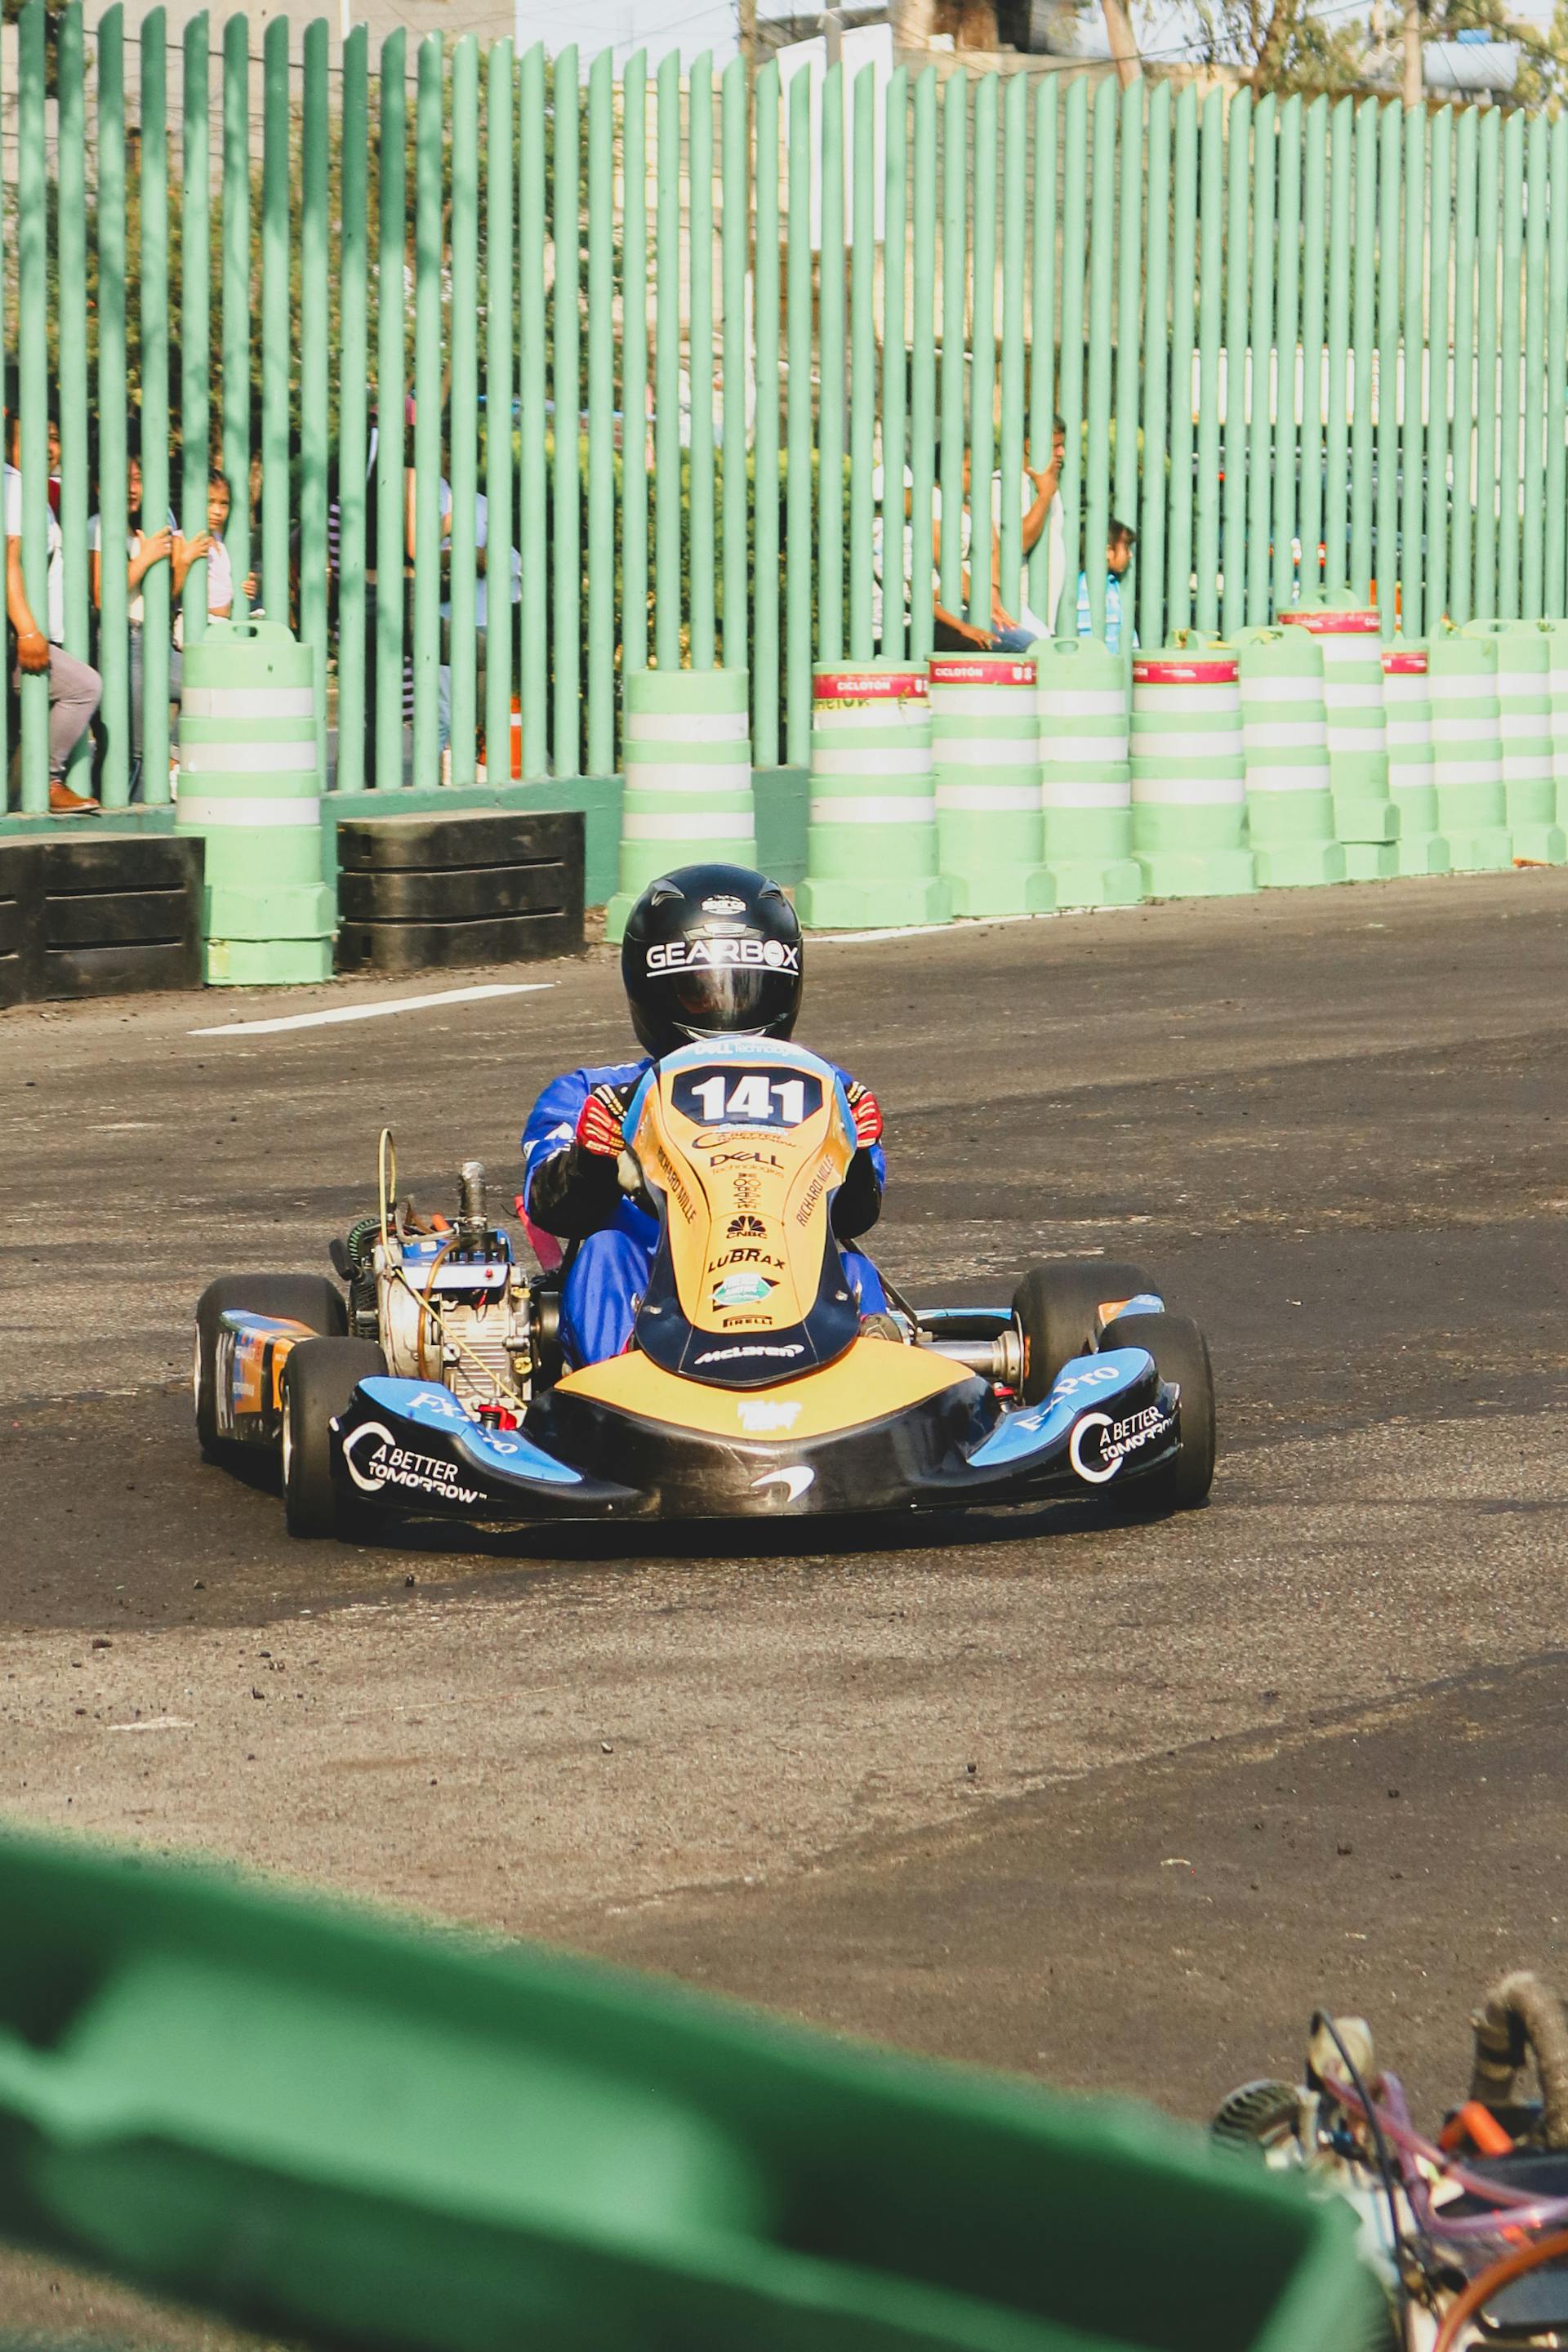 A person in a karting race | Source: Pexels